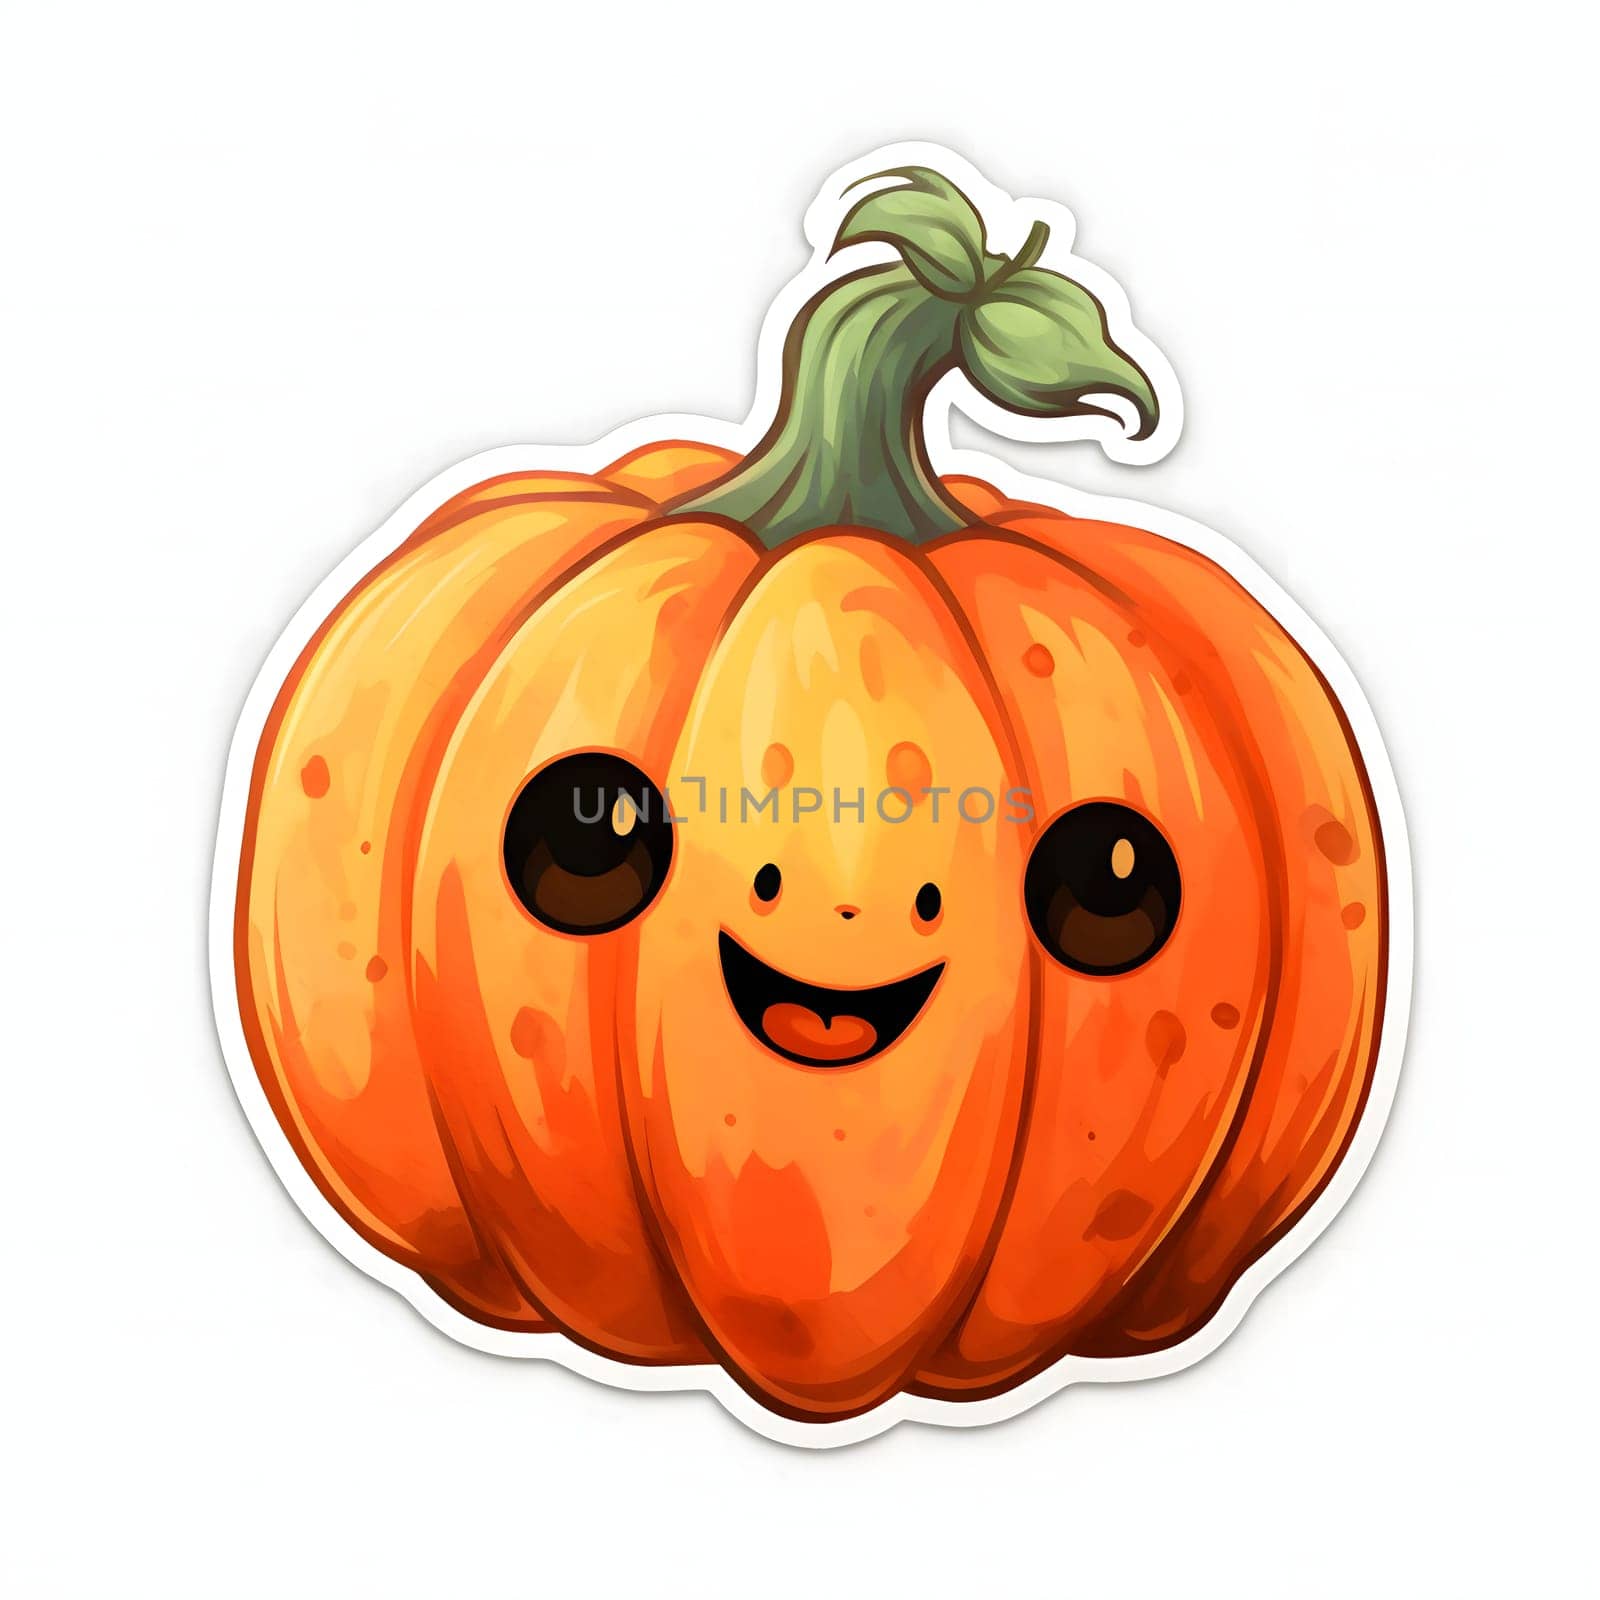 Sticker small smiling pumpkin, Halloween image on a white isolated background. by ThemesS